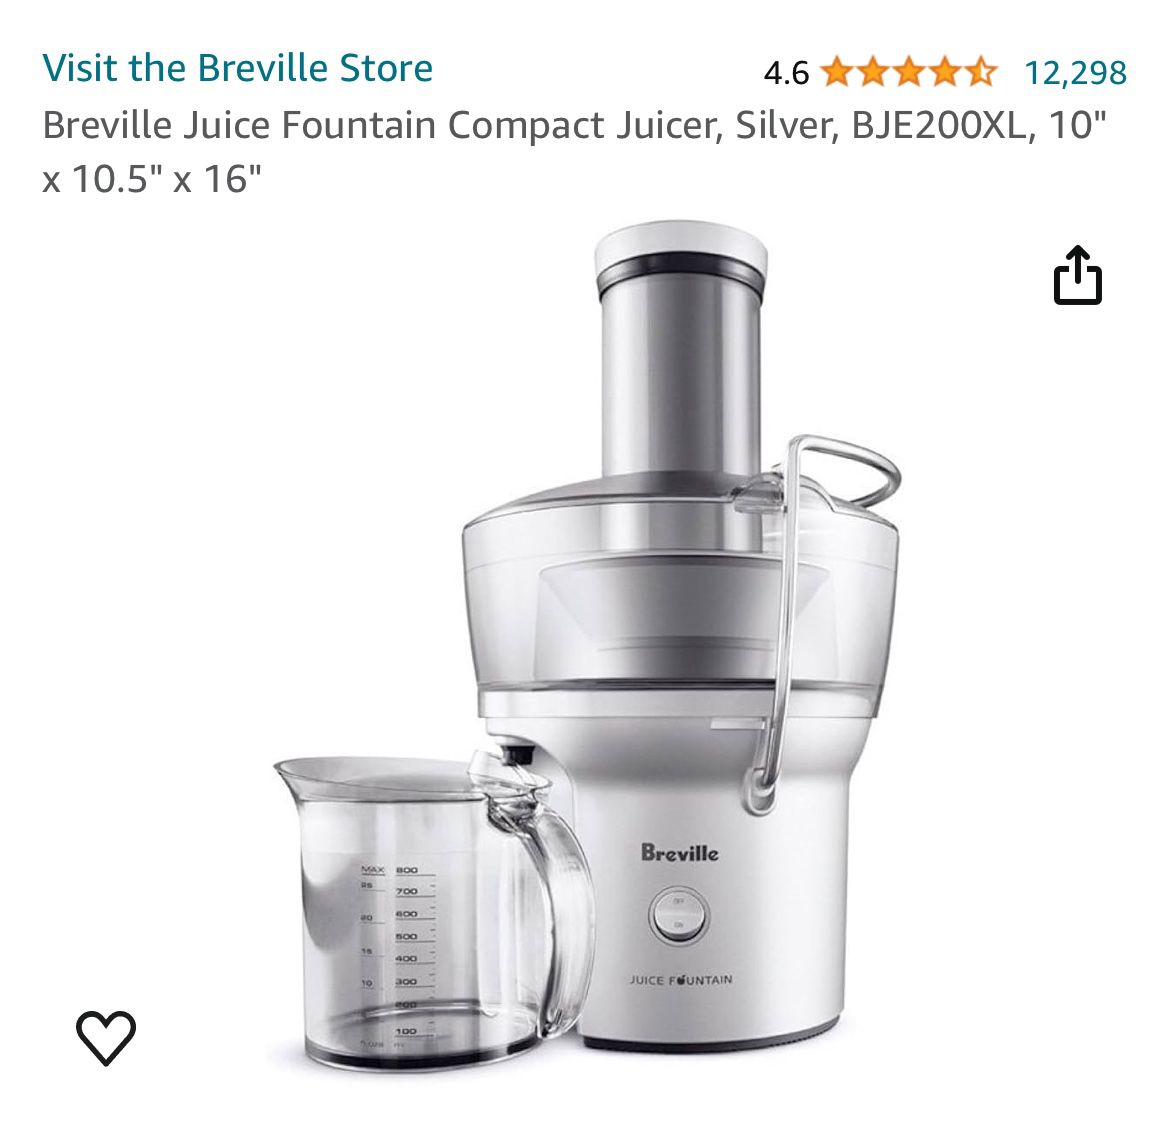 Breville Juice Fountain Compact Juicer, Silver, BJE200XL,